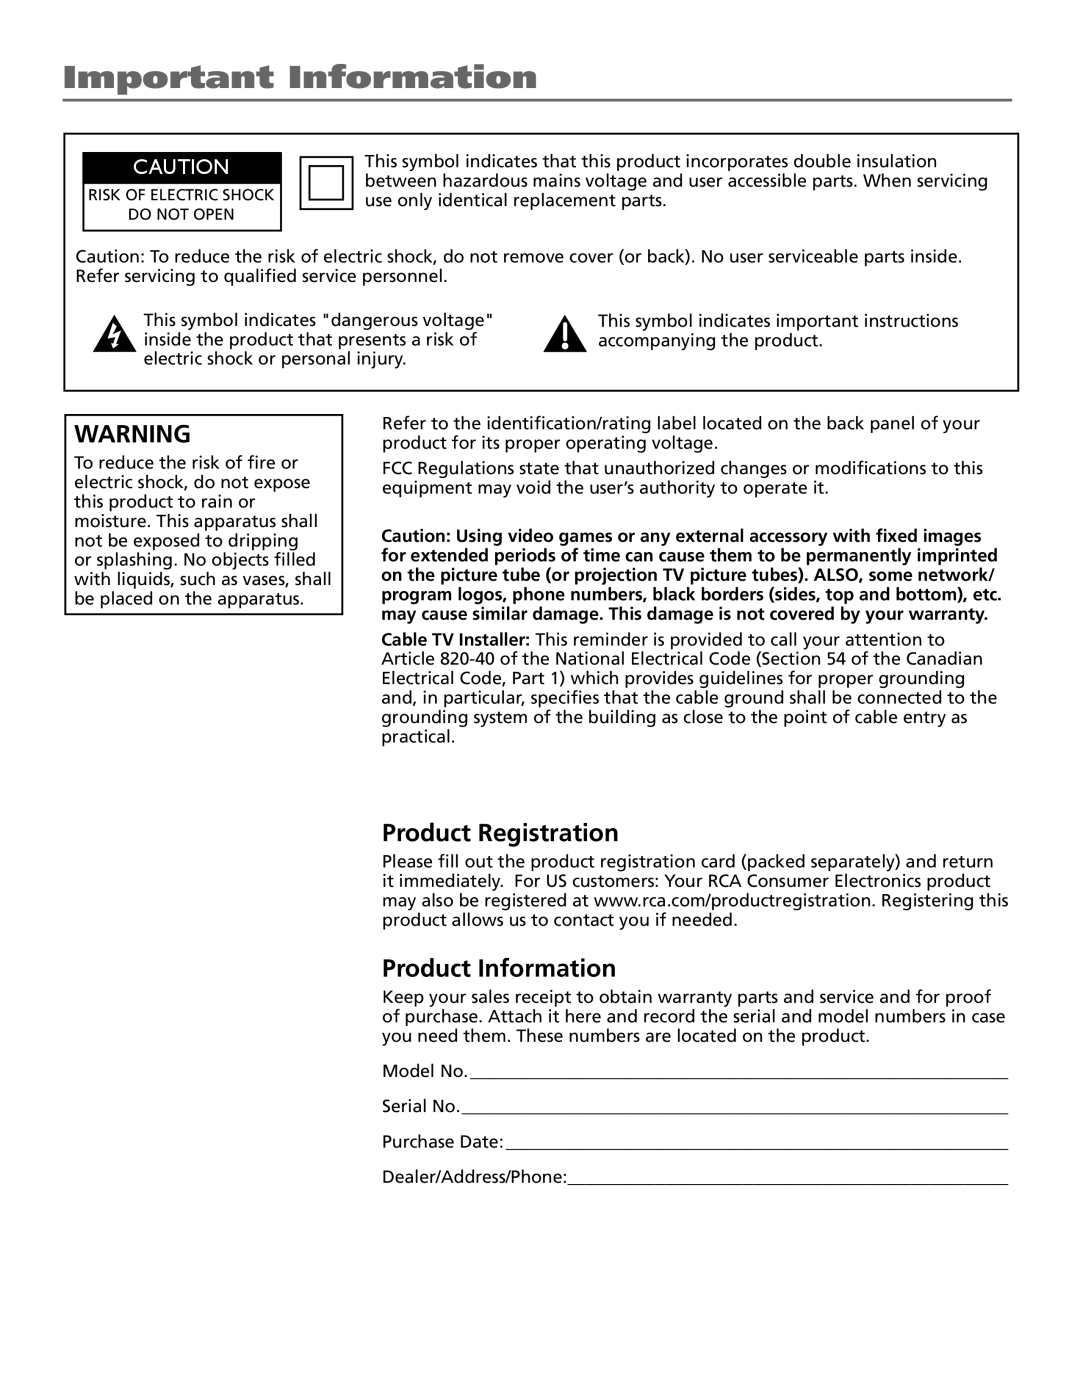 RCA J27F636 manual Important Information, Product Registration, Product Information 